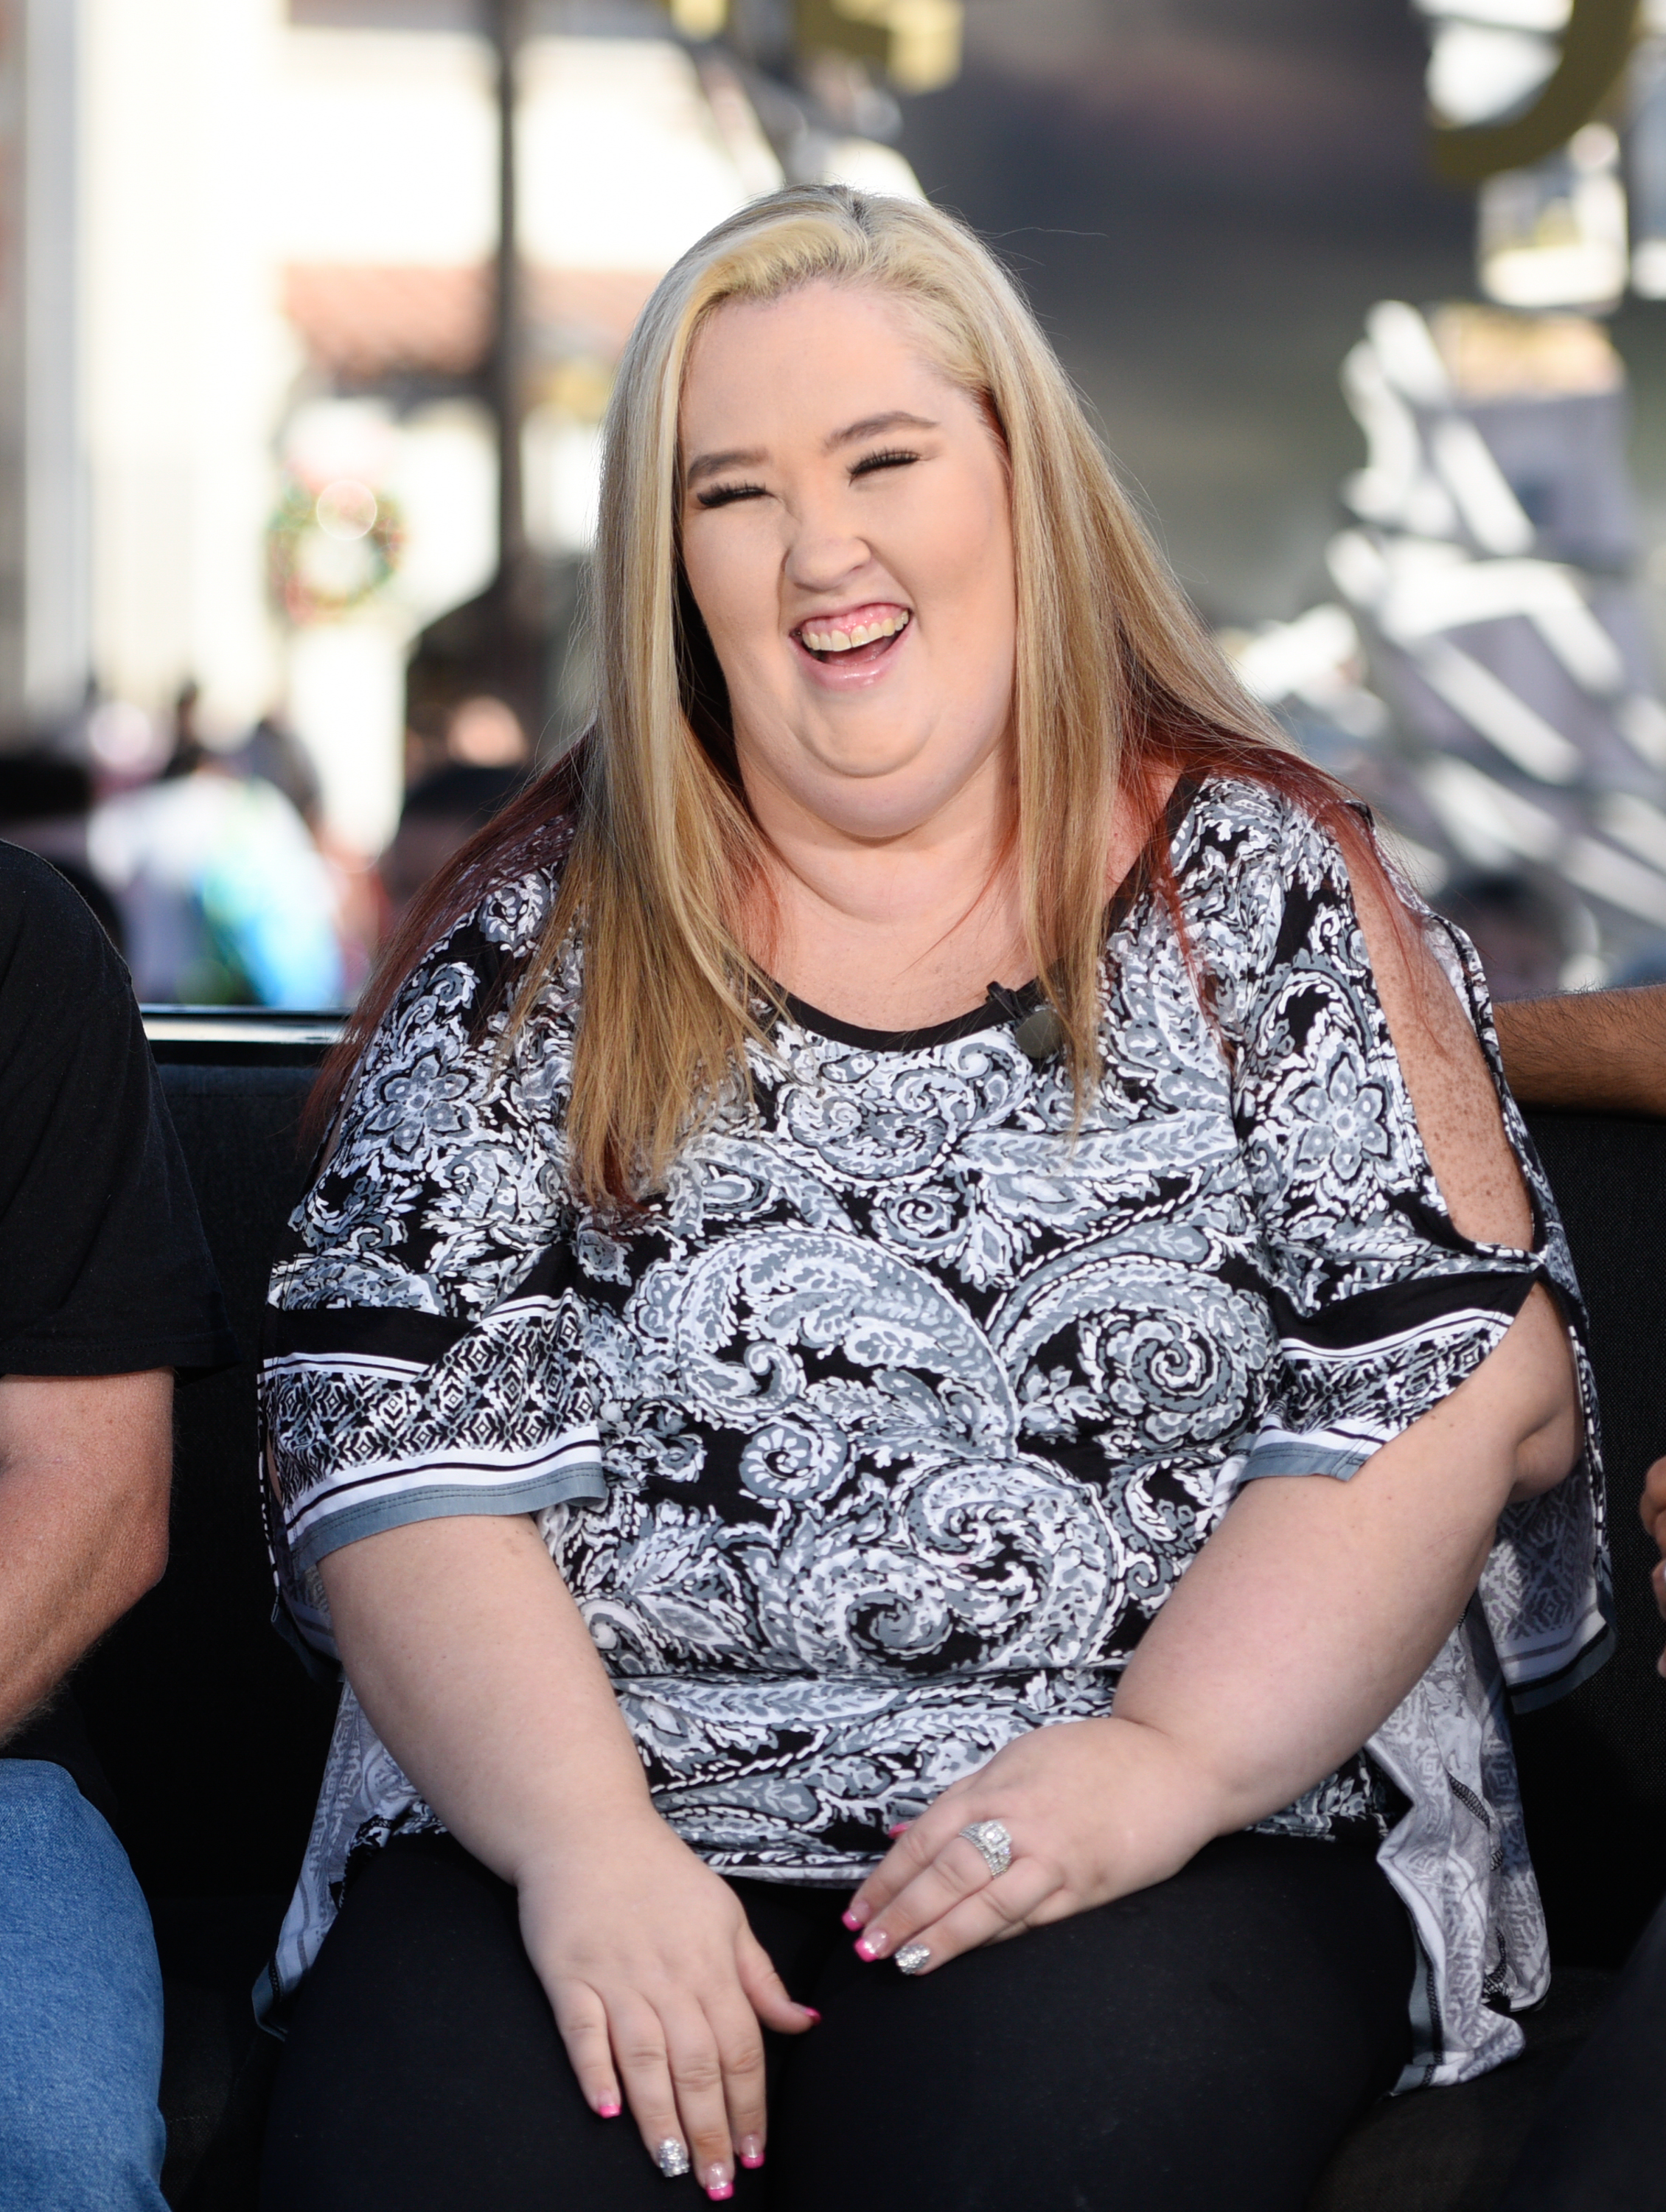 What Is Mama June's Net Worth? Find out How Much the Star is Worth!